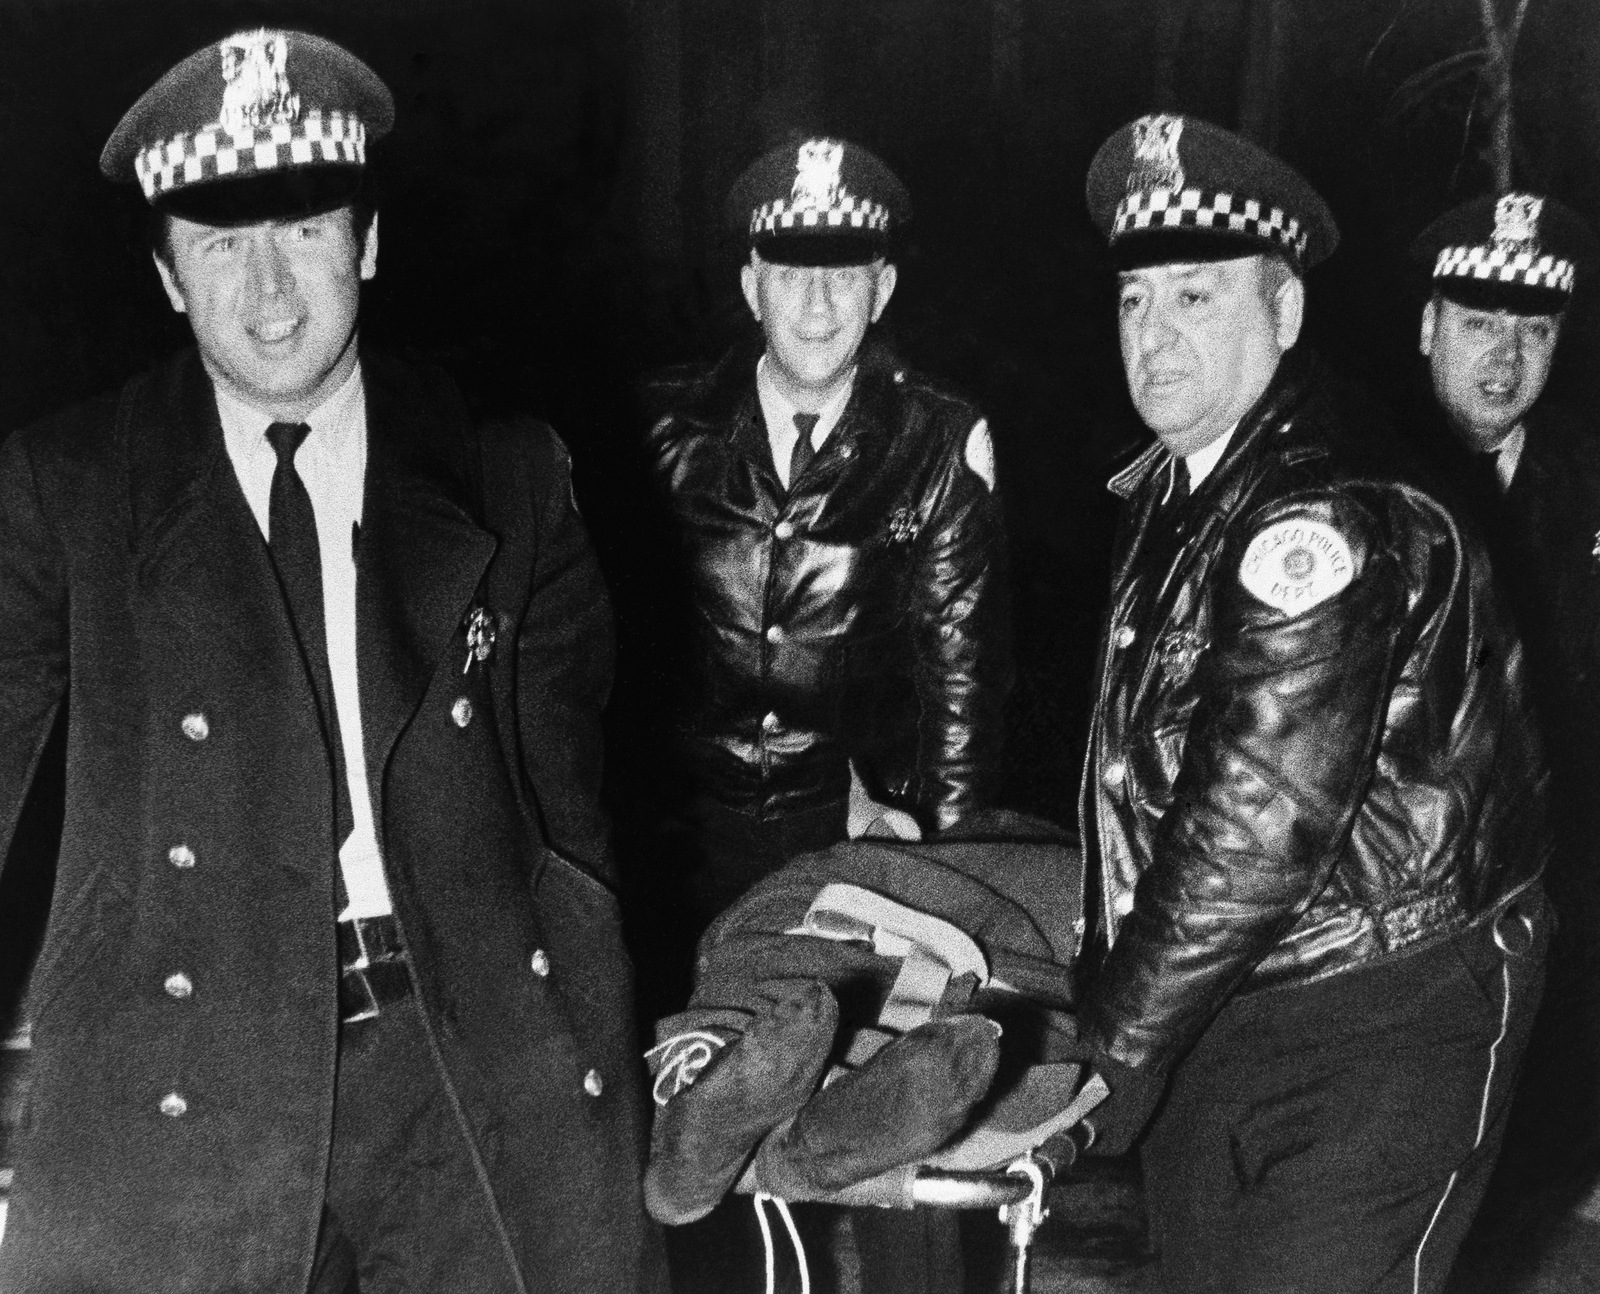 Chicago police remove the body of Fred Hampton, leader of the Illinois Black Panther Party, who was slain by police on Chicago's west side Dec. 4, 1969. (AP Photo)